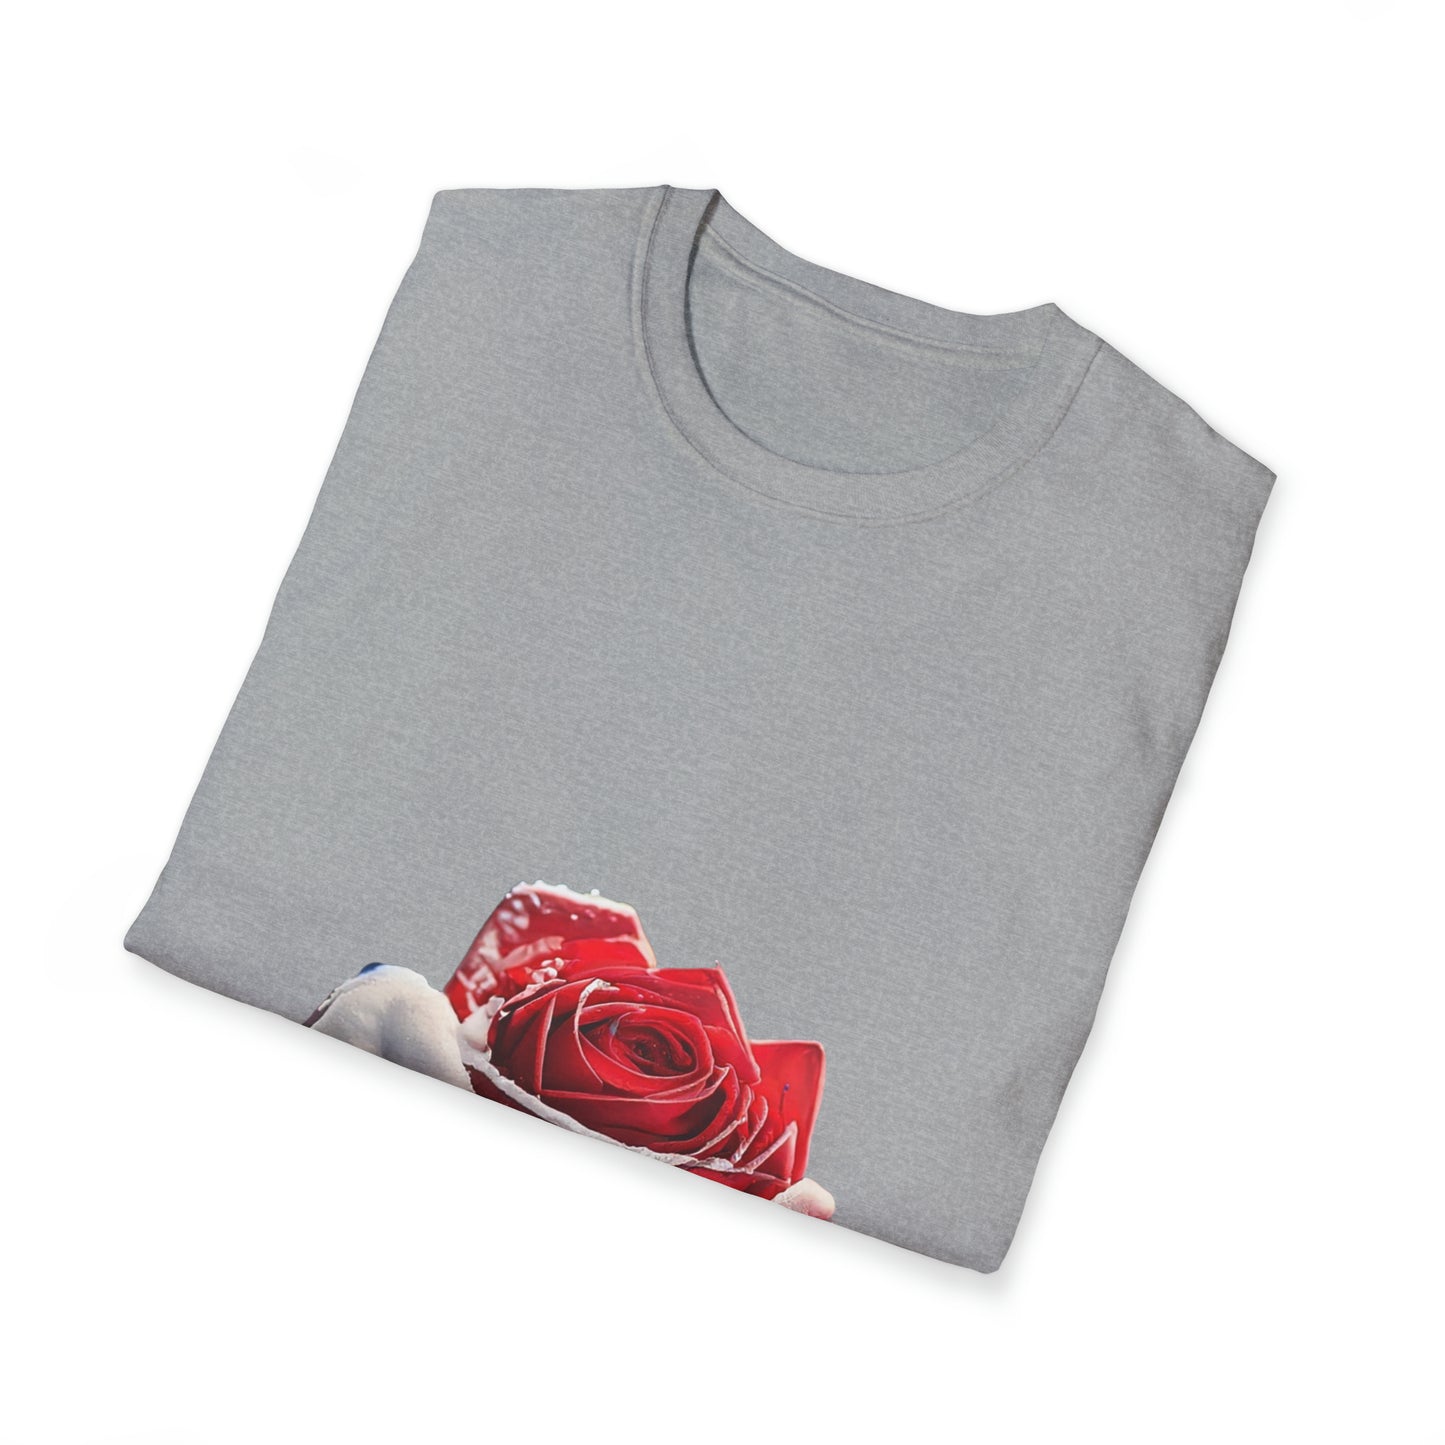 Snowy Red Rose - Unisex Softstyle T-Shirt